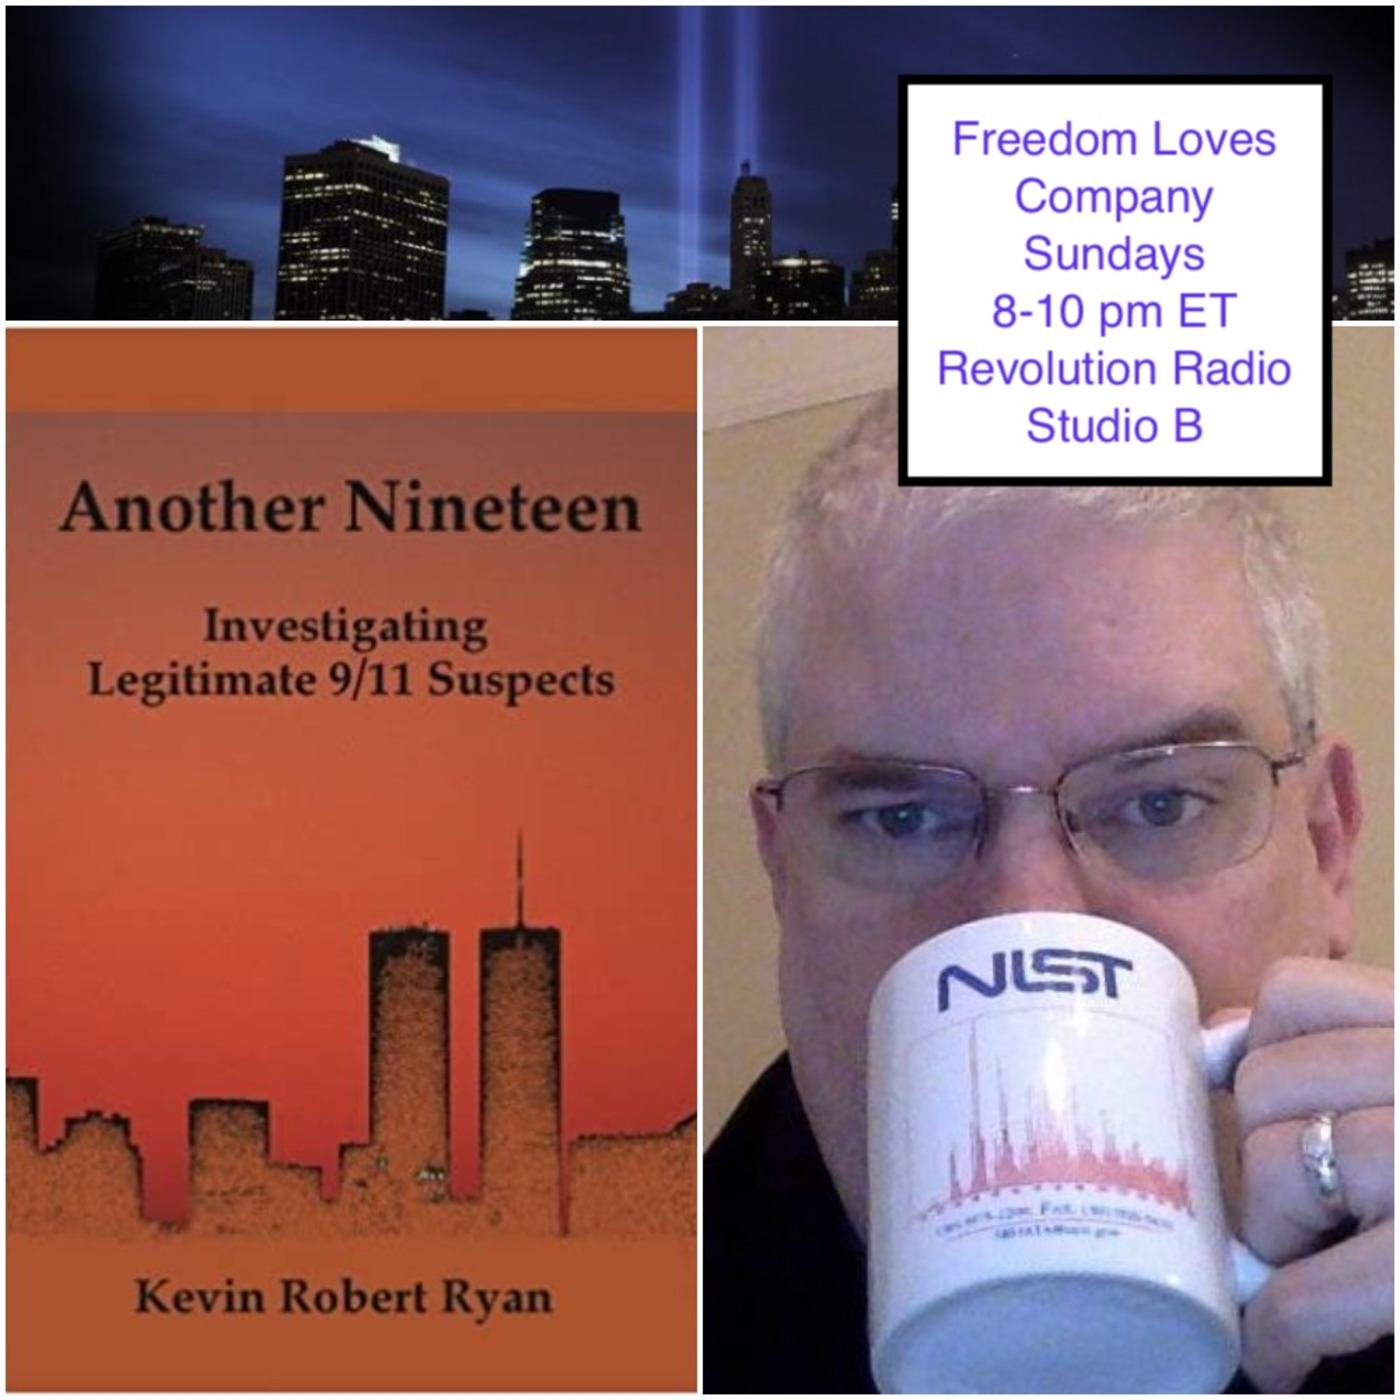 Episode 419: Parallels Between 9/11 and Covid: A Conversation with Kevin Ryan